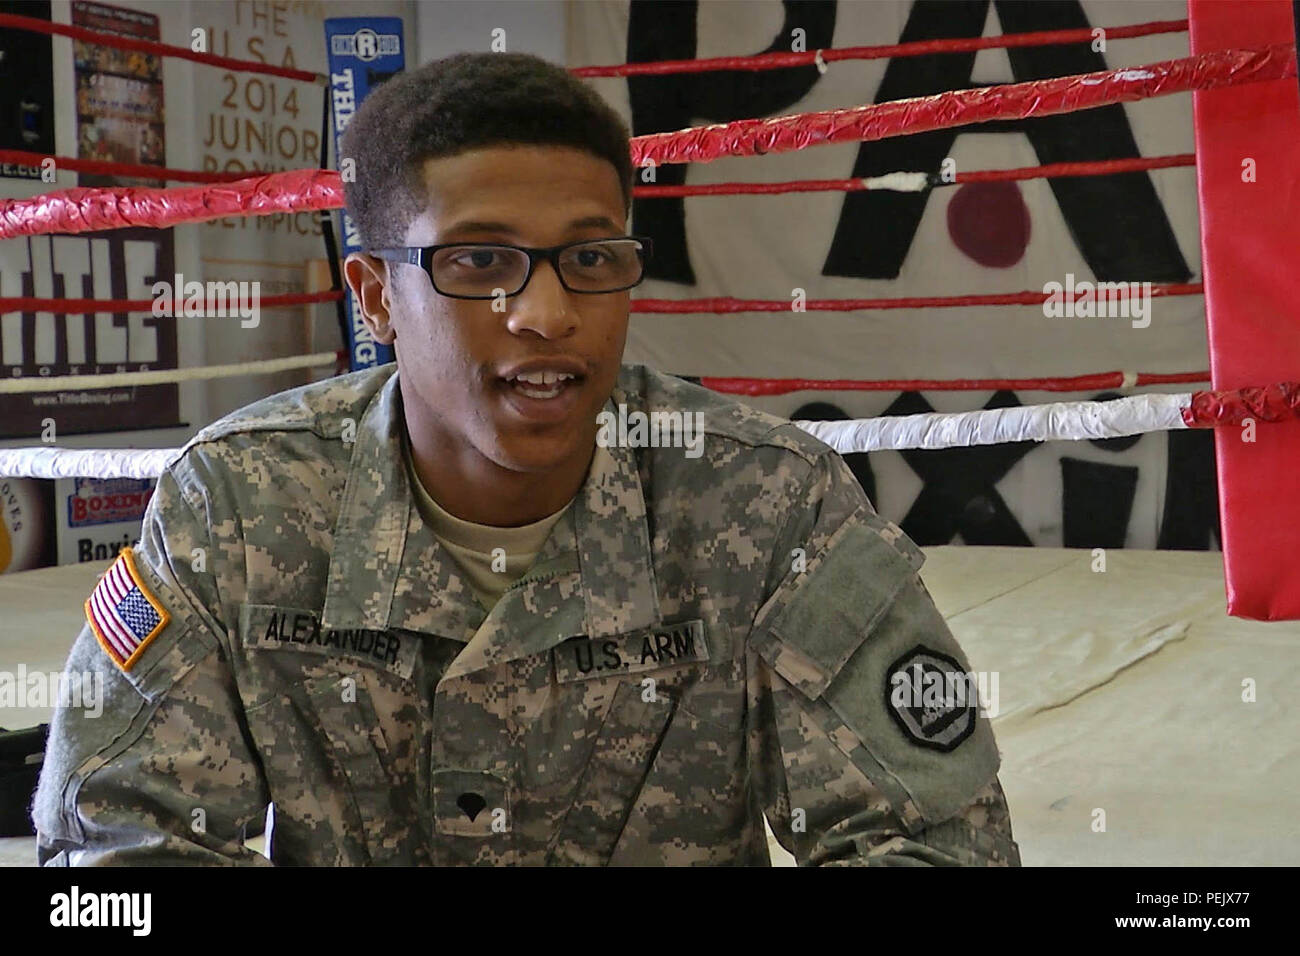 Spc. Trey Alexander, a Louisiana National Guardsman and amateur boxer, trains in Houma, La., in preparation for the All-Army Boxing Tournament, Aug. 13, 2015. Alexander, a food service specialist with Headquarters and Headquarters Detachment, 139th Regional Support Group, traveled to Fort Huachuca, Ariz., where he won his weight class and earned a spot on the All-Army Boxing Team. (U.S. Army National Guard Photo by Staff Sgt. David C Kirtland/RELEASED) Stock Photo